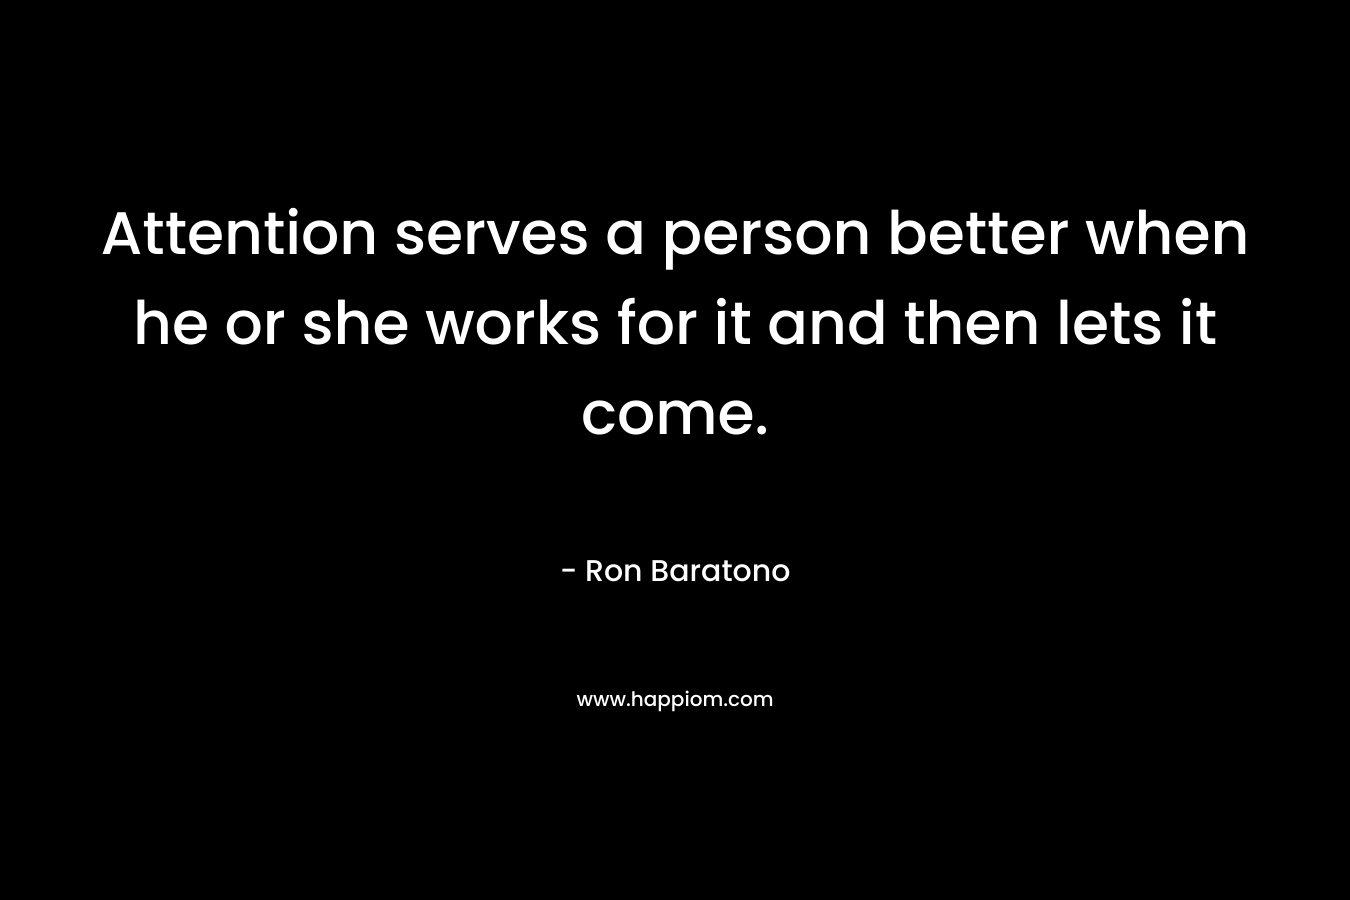 Attention serves a person better when he or she works for it and then lets it come. – Ron Baratono